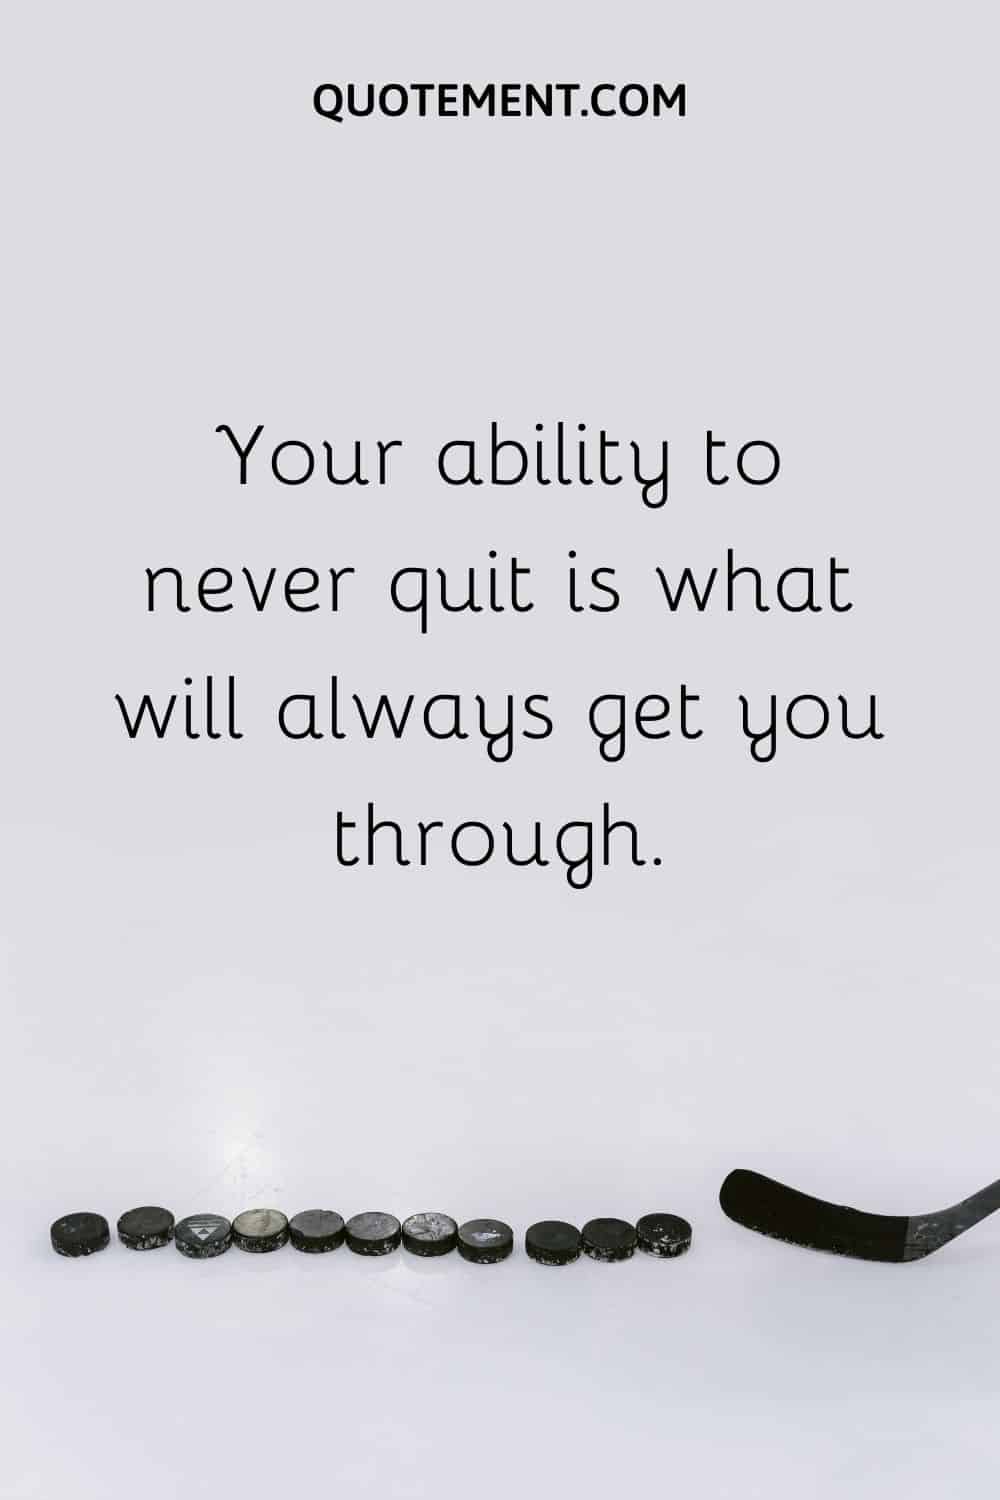 Your ability to never quit is what will always get you through.